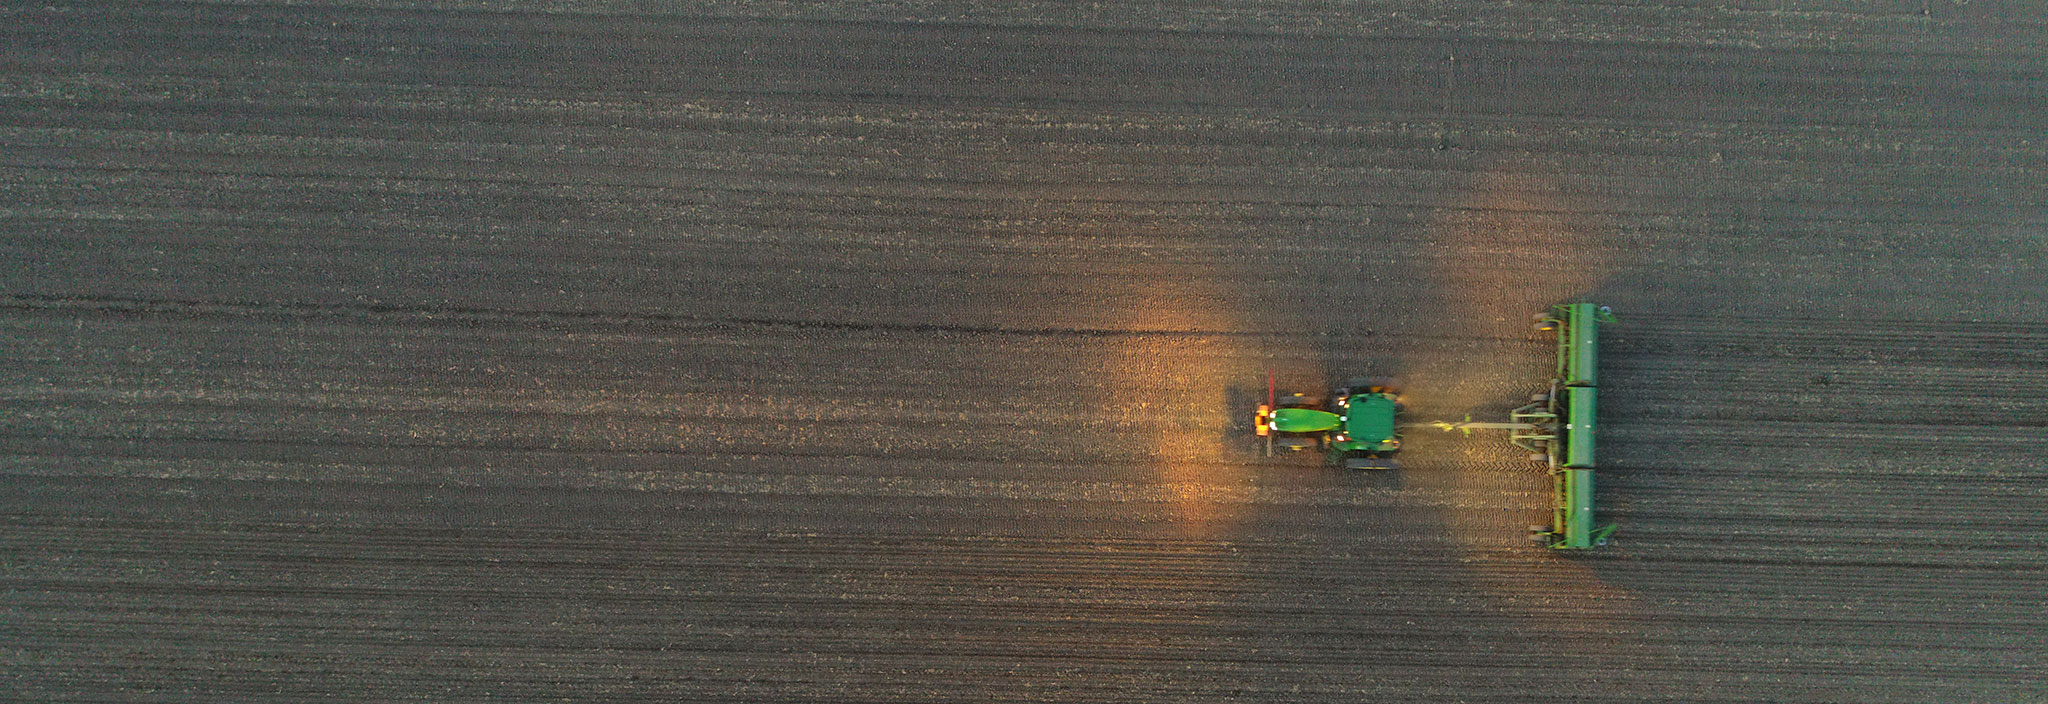 Aerial photo of farm operations at our test plots.